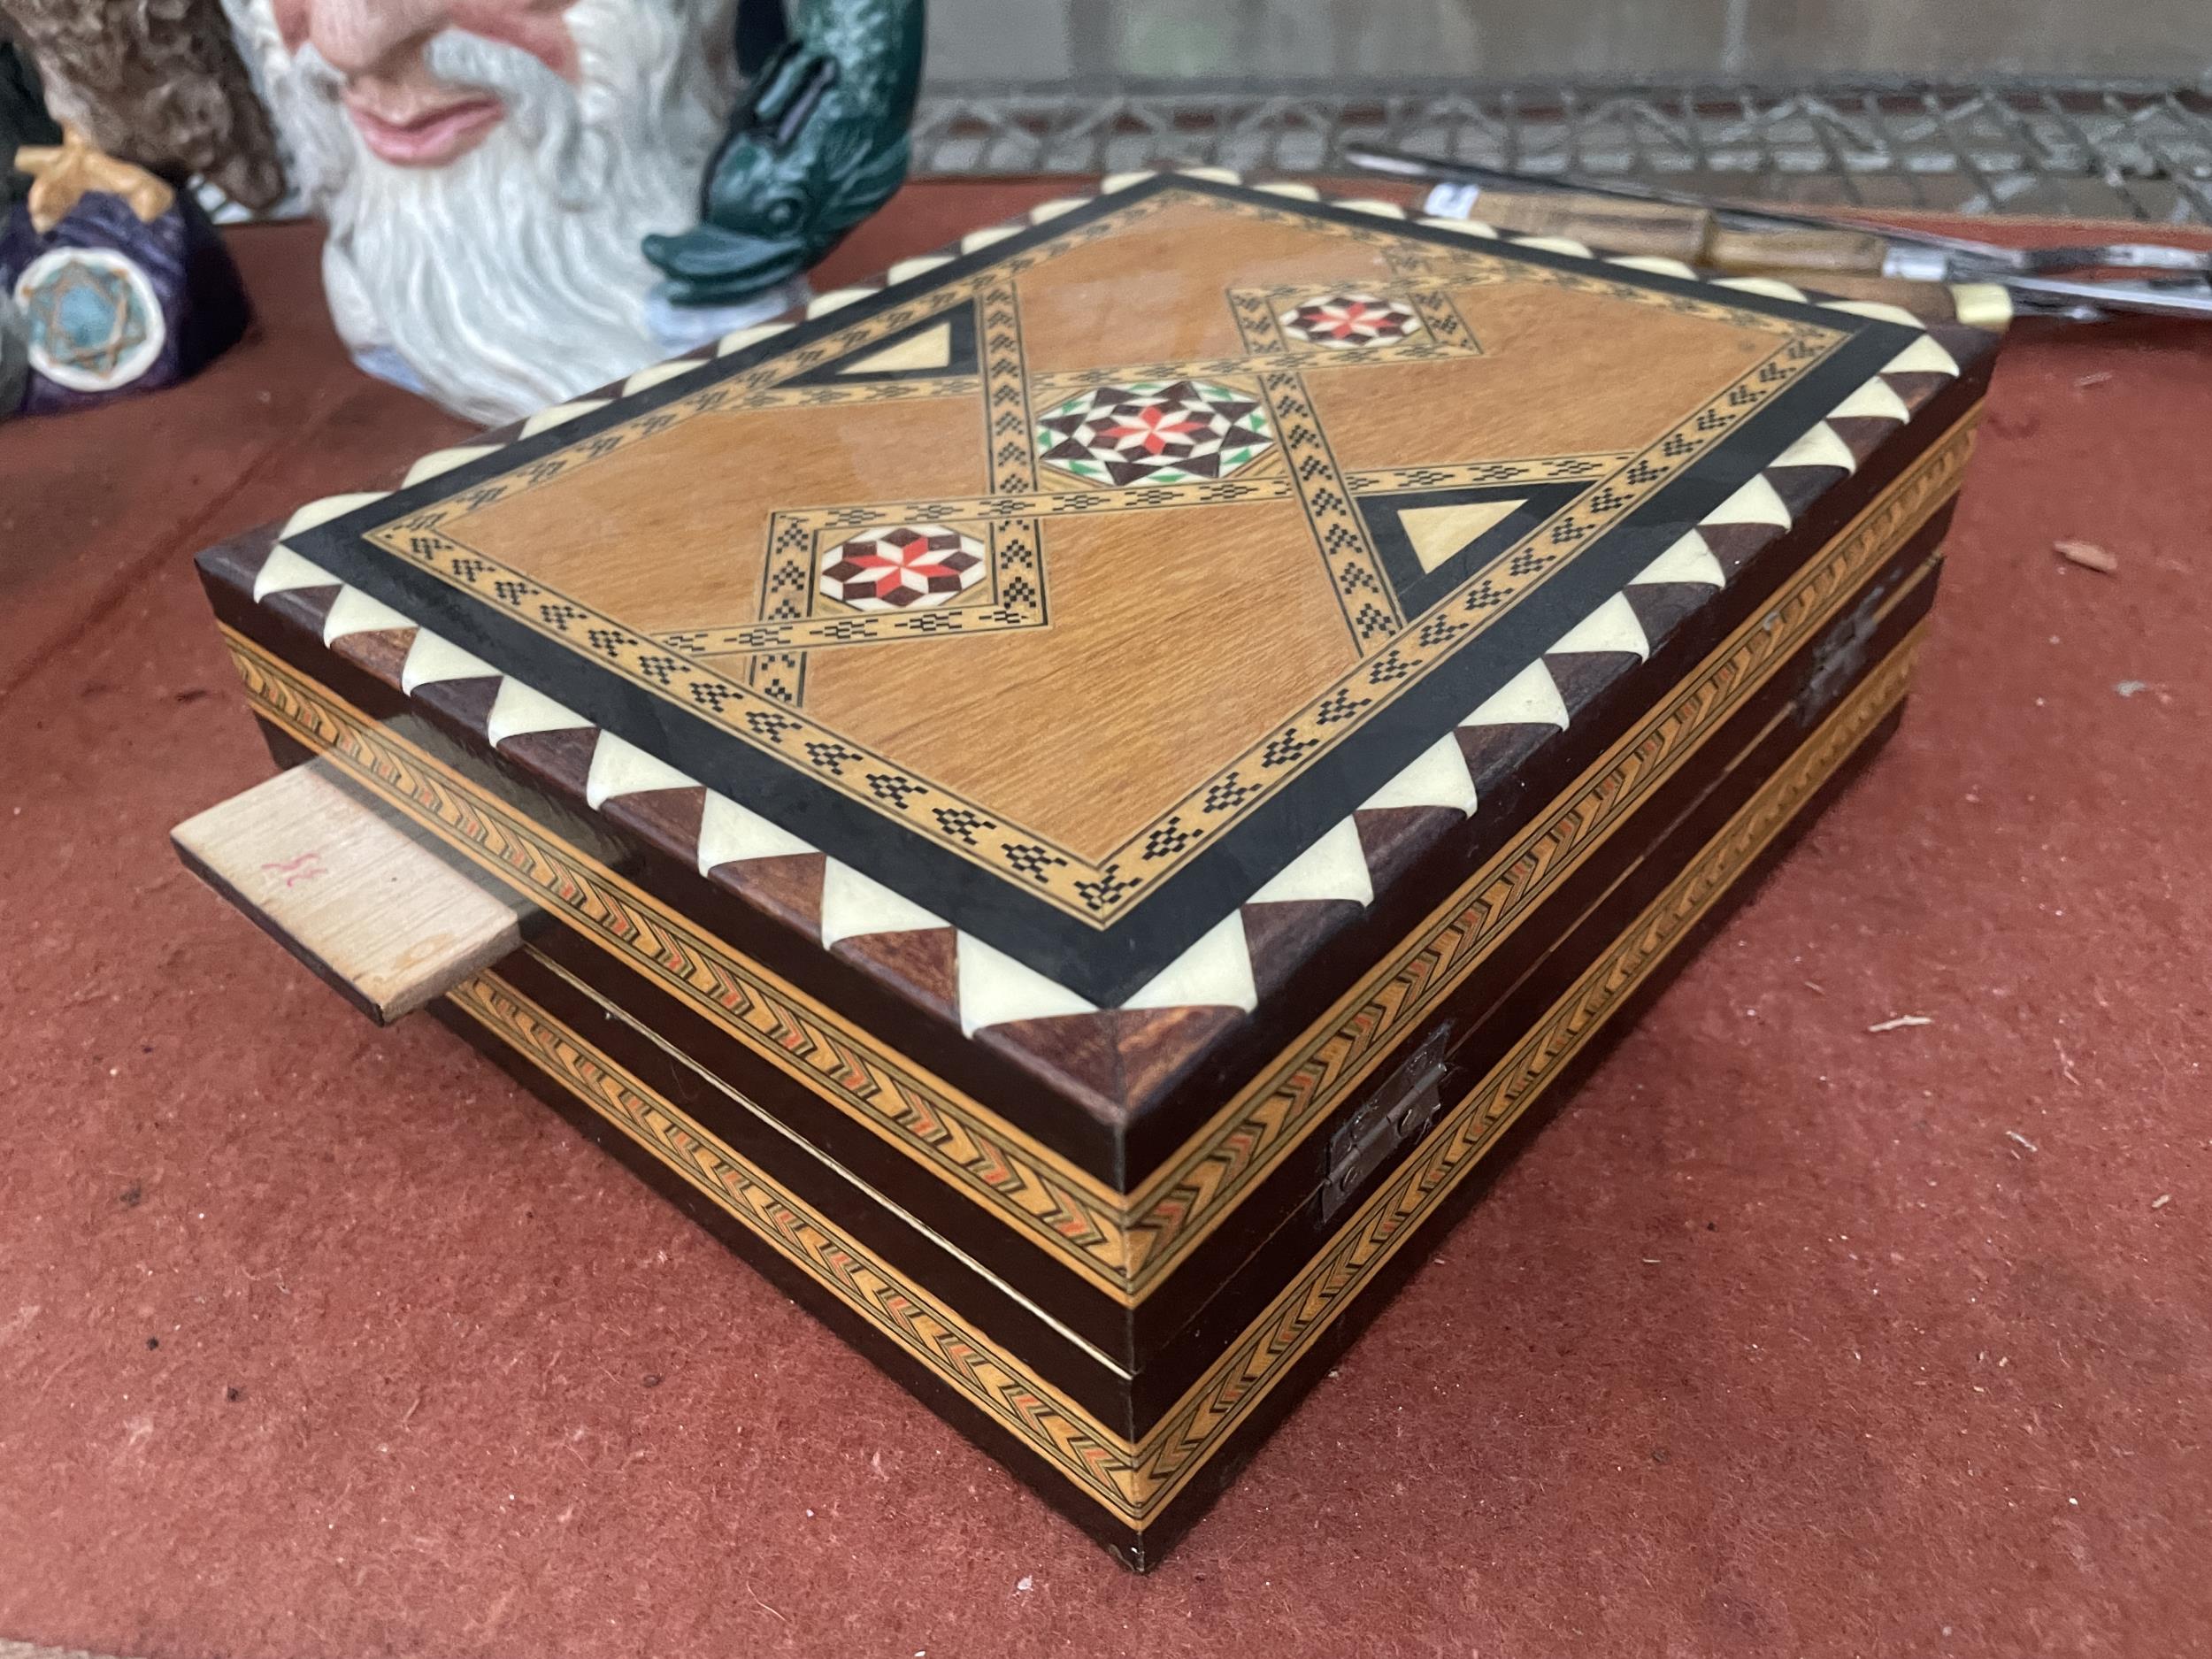 A VINTAGE WOODEN FOLDING TRAVEL CHESS BOARD AND CHESS PIECES - Image 6 of 6